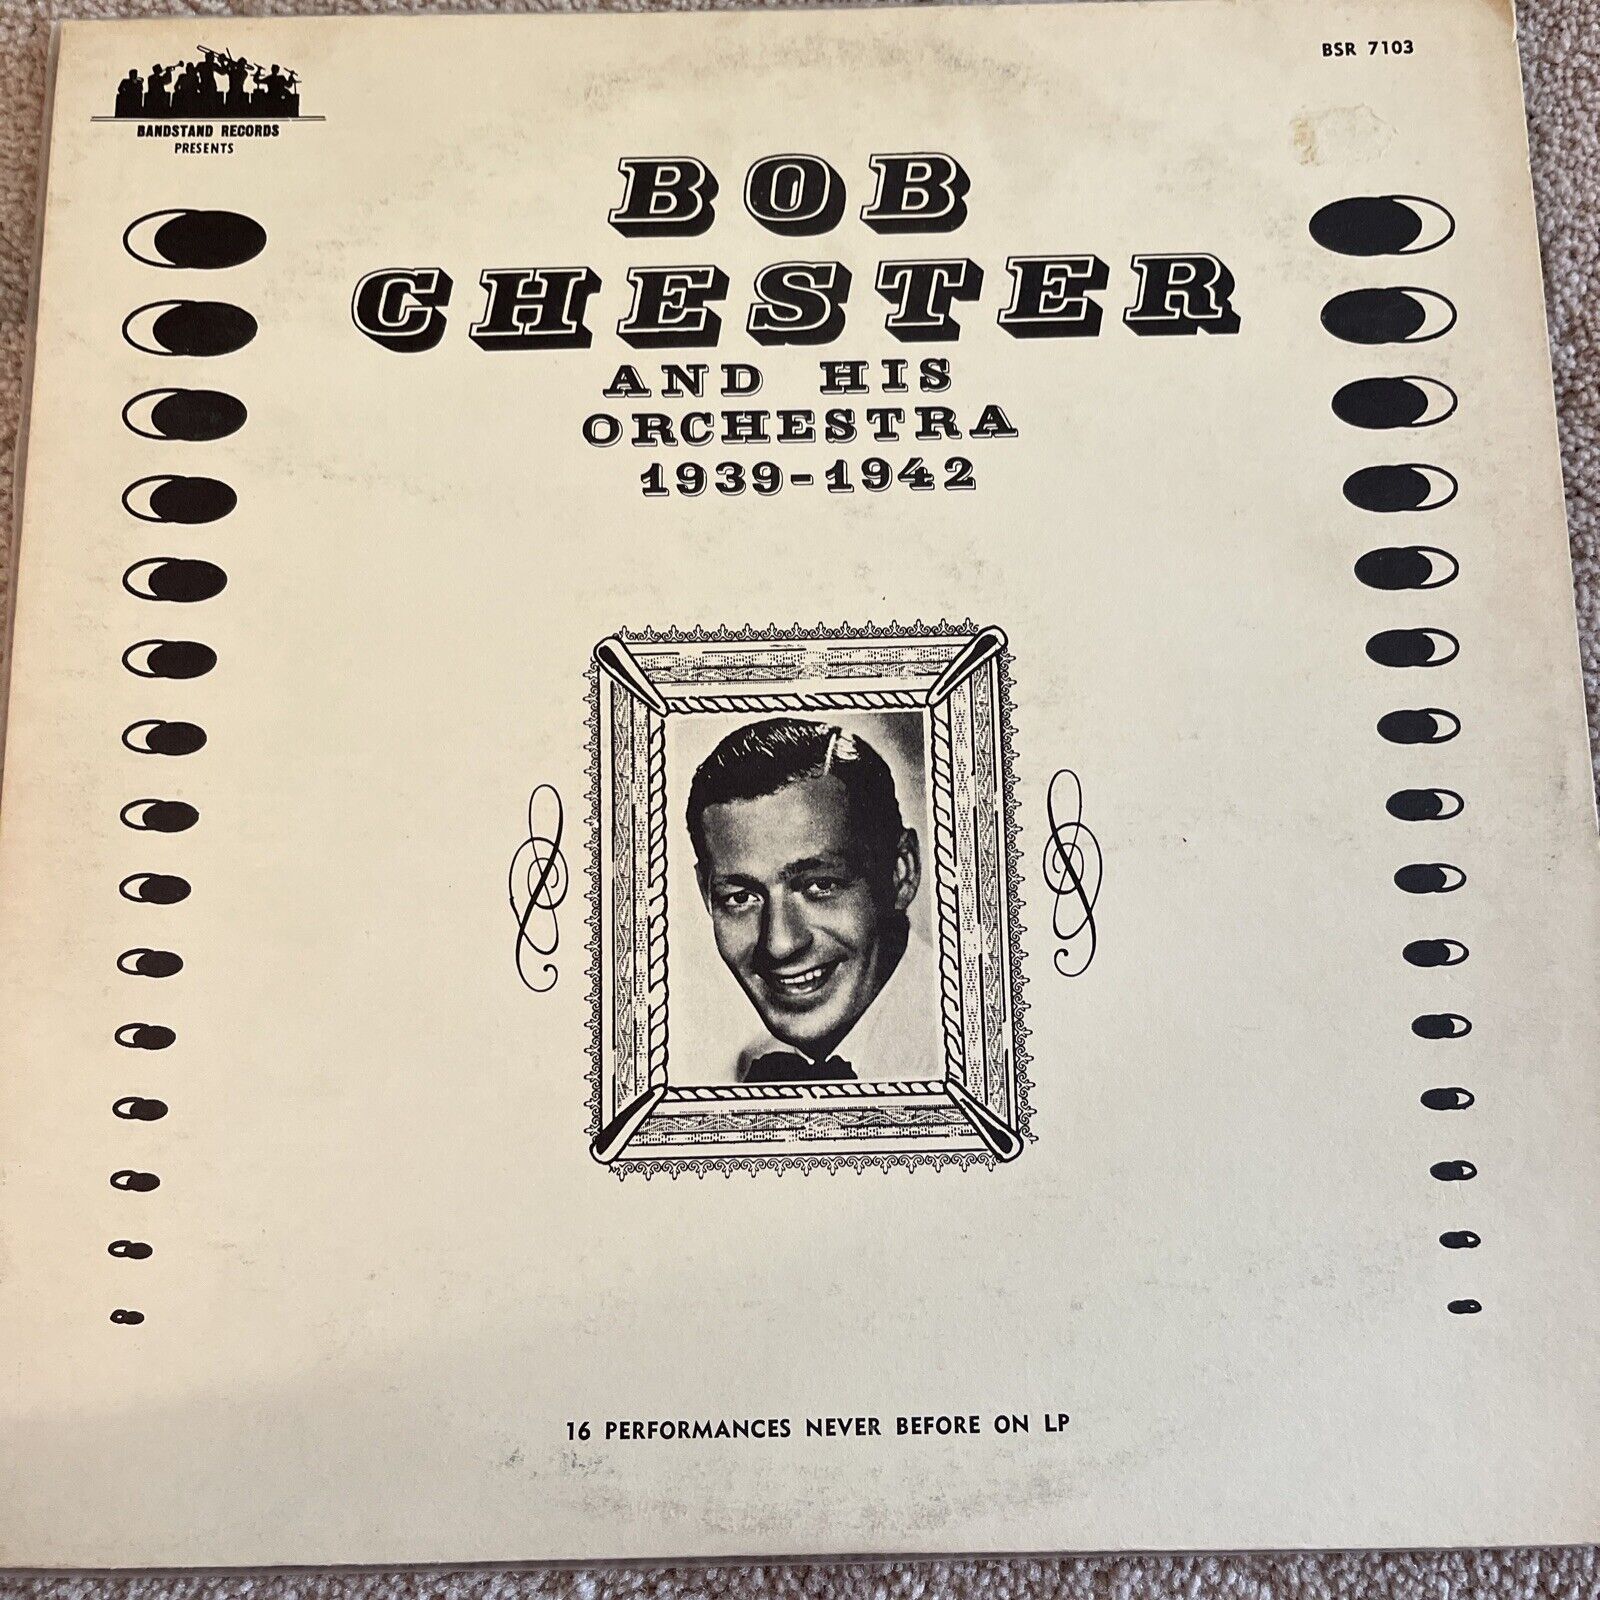 Bob Chester And His Orchestra 1939-1942 16 performances never before on LP vinyl